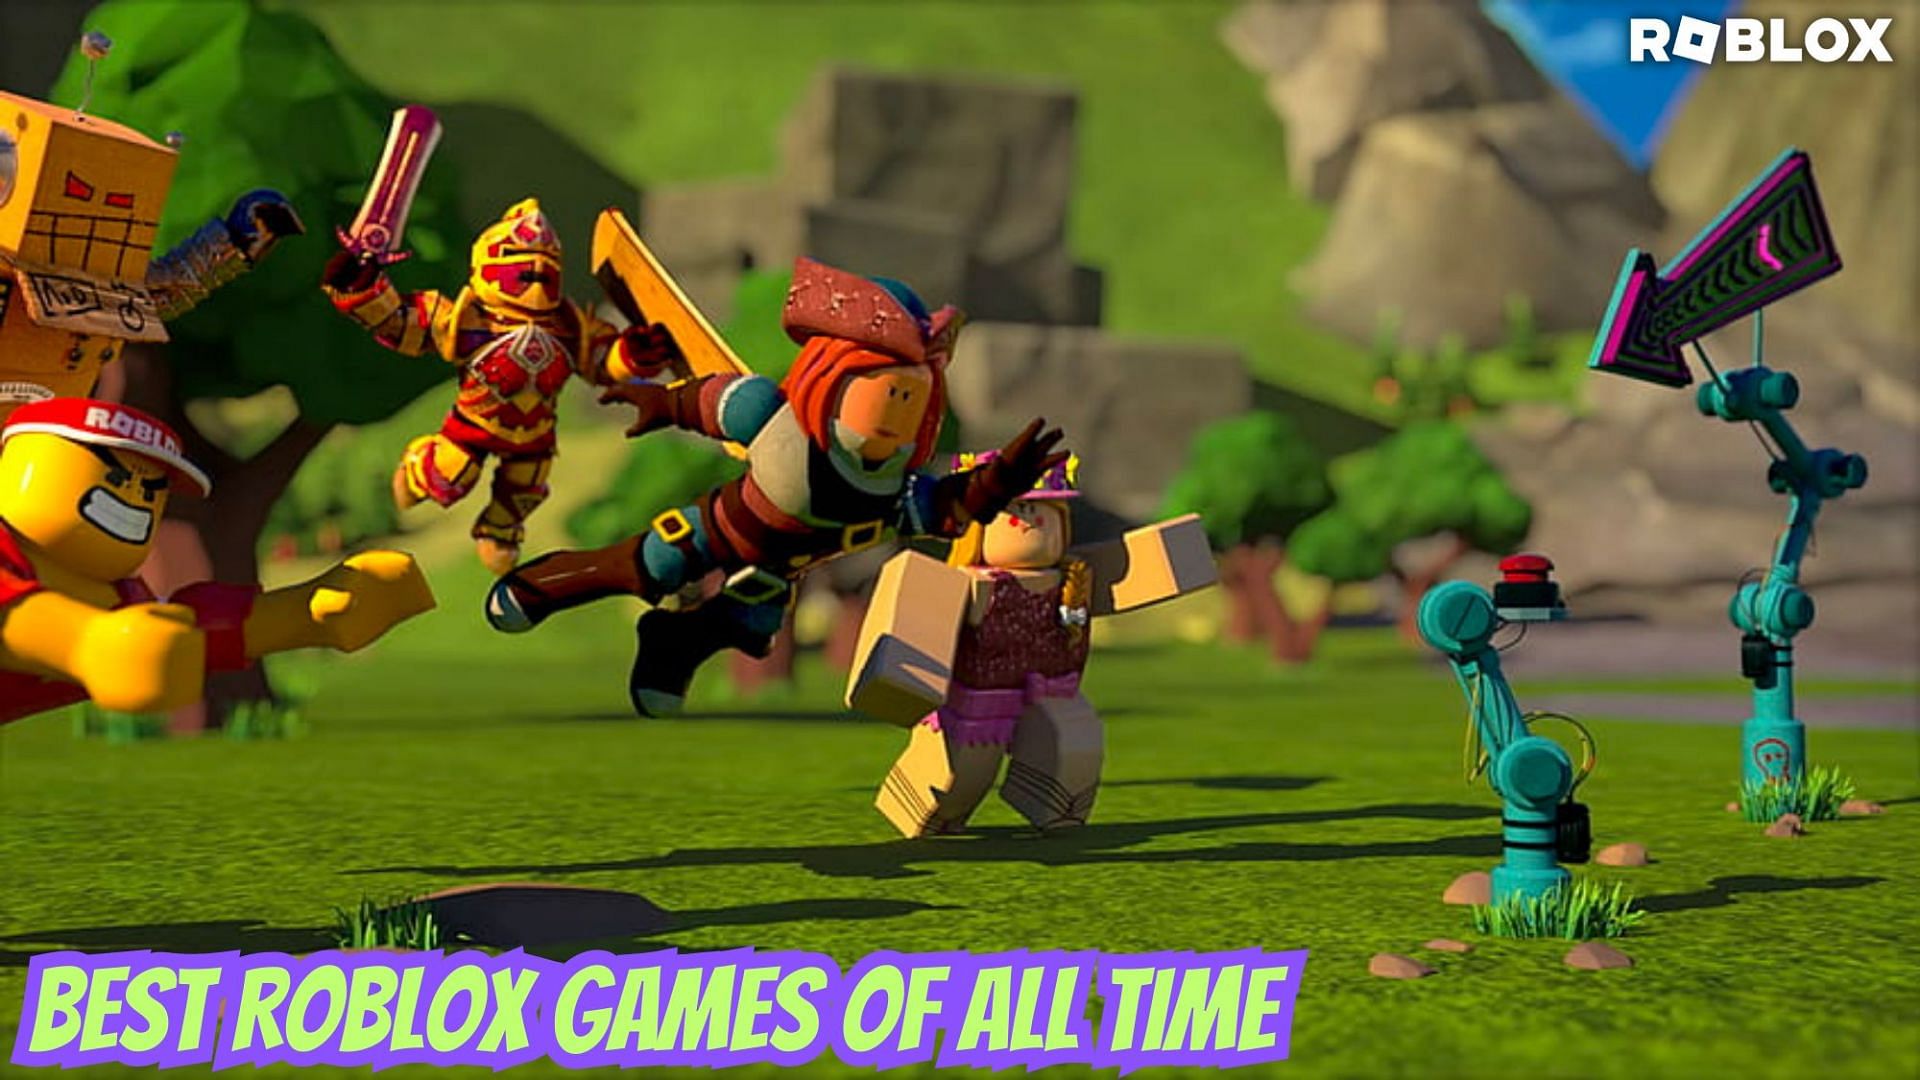 Roblox's 10 biggest games of all time -- each with more than a